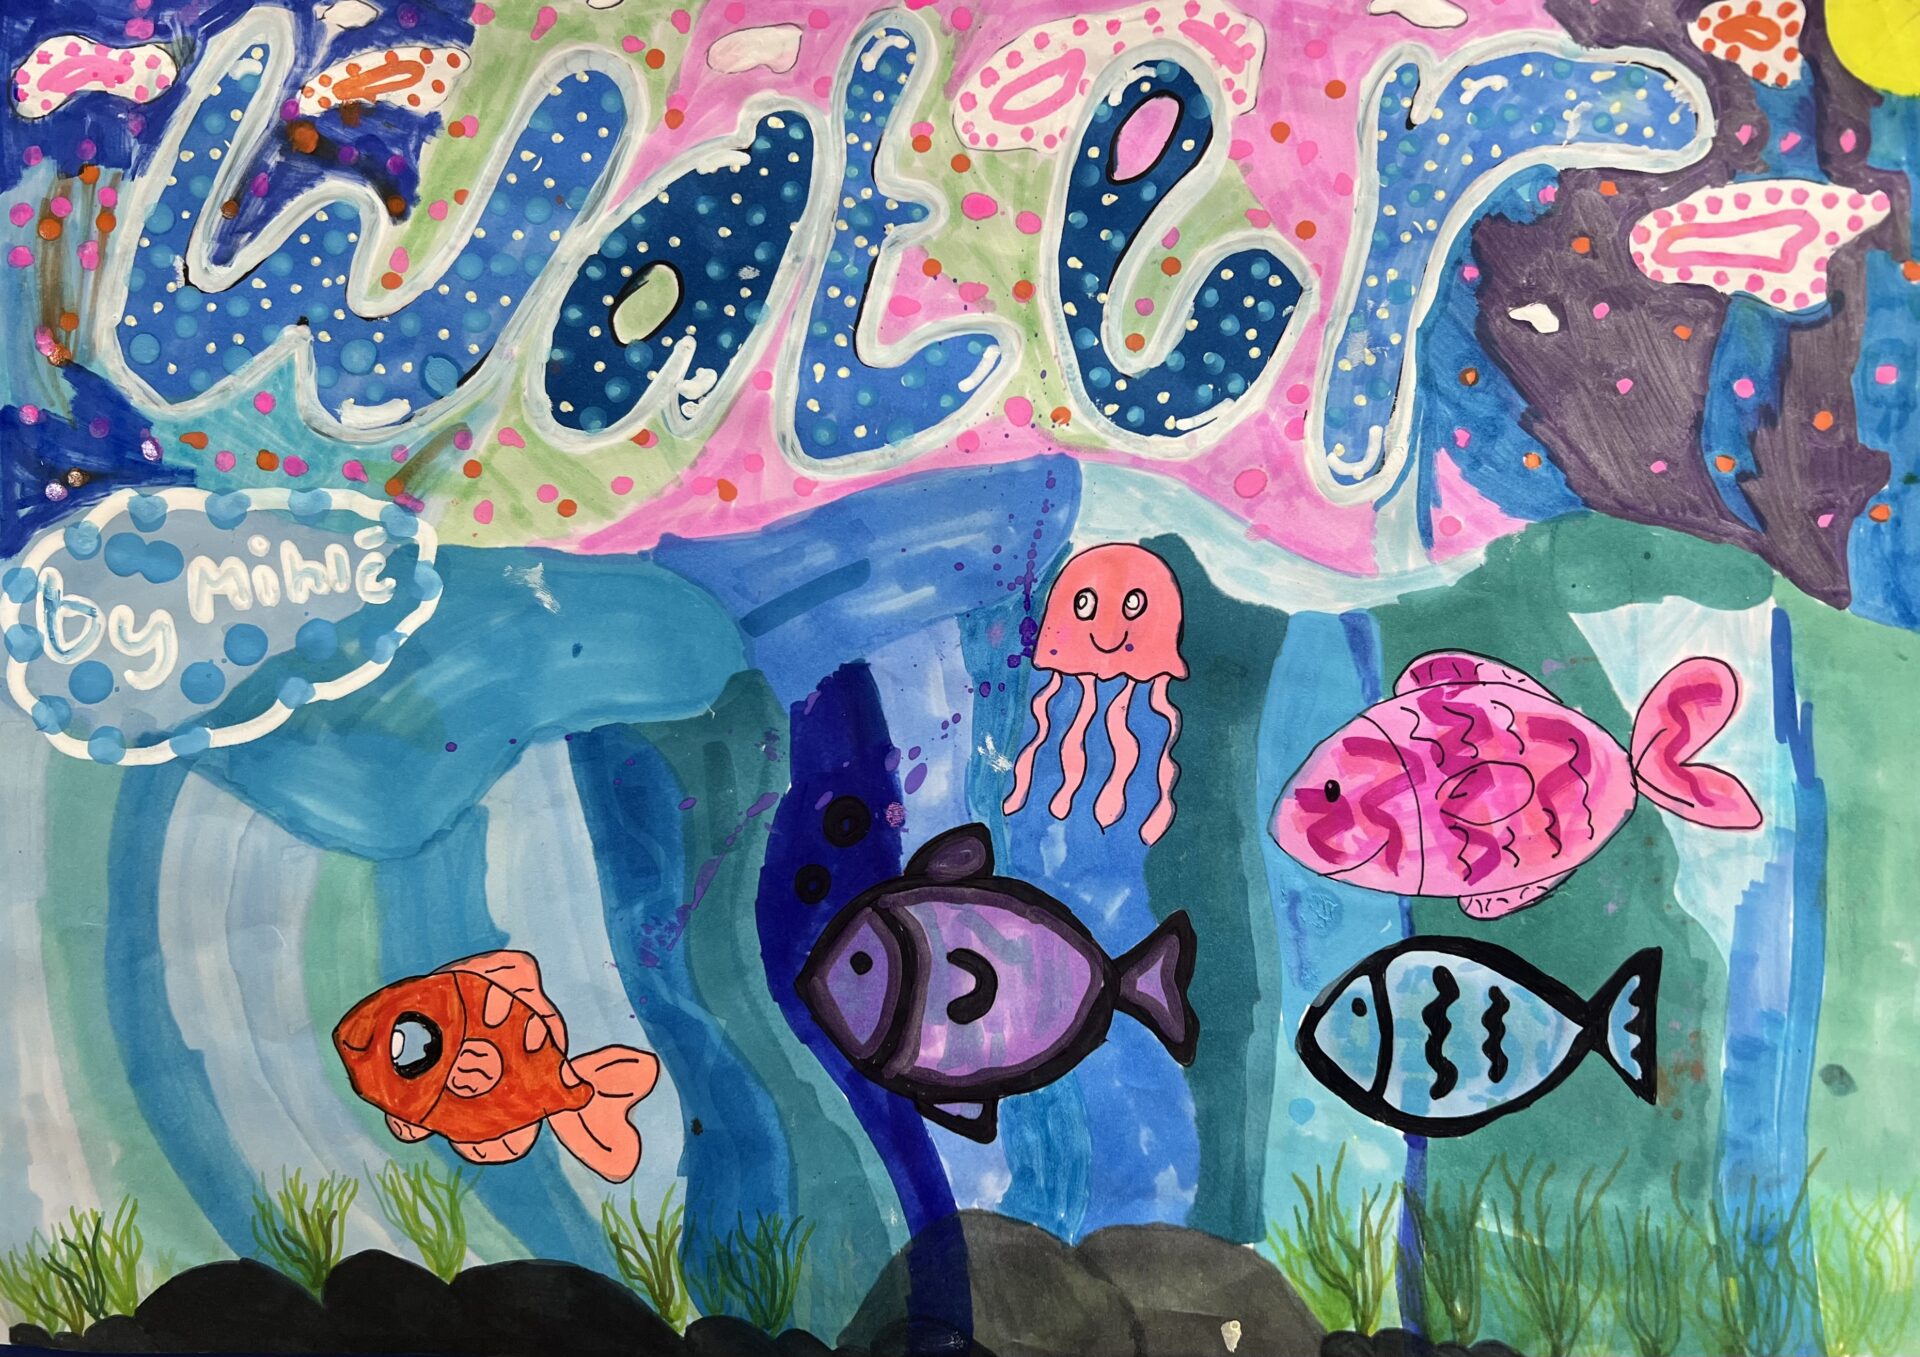 Grade 3 and 4 Second Prize - Mihle Linde - St Mary's Primary School Robinvale 